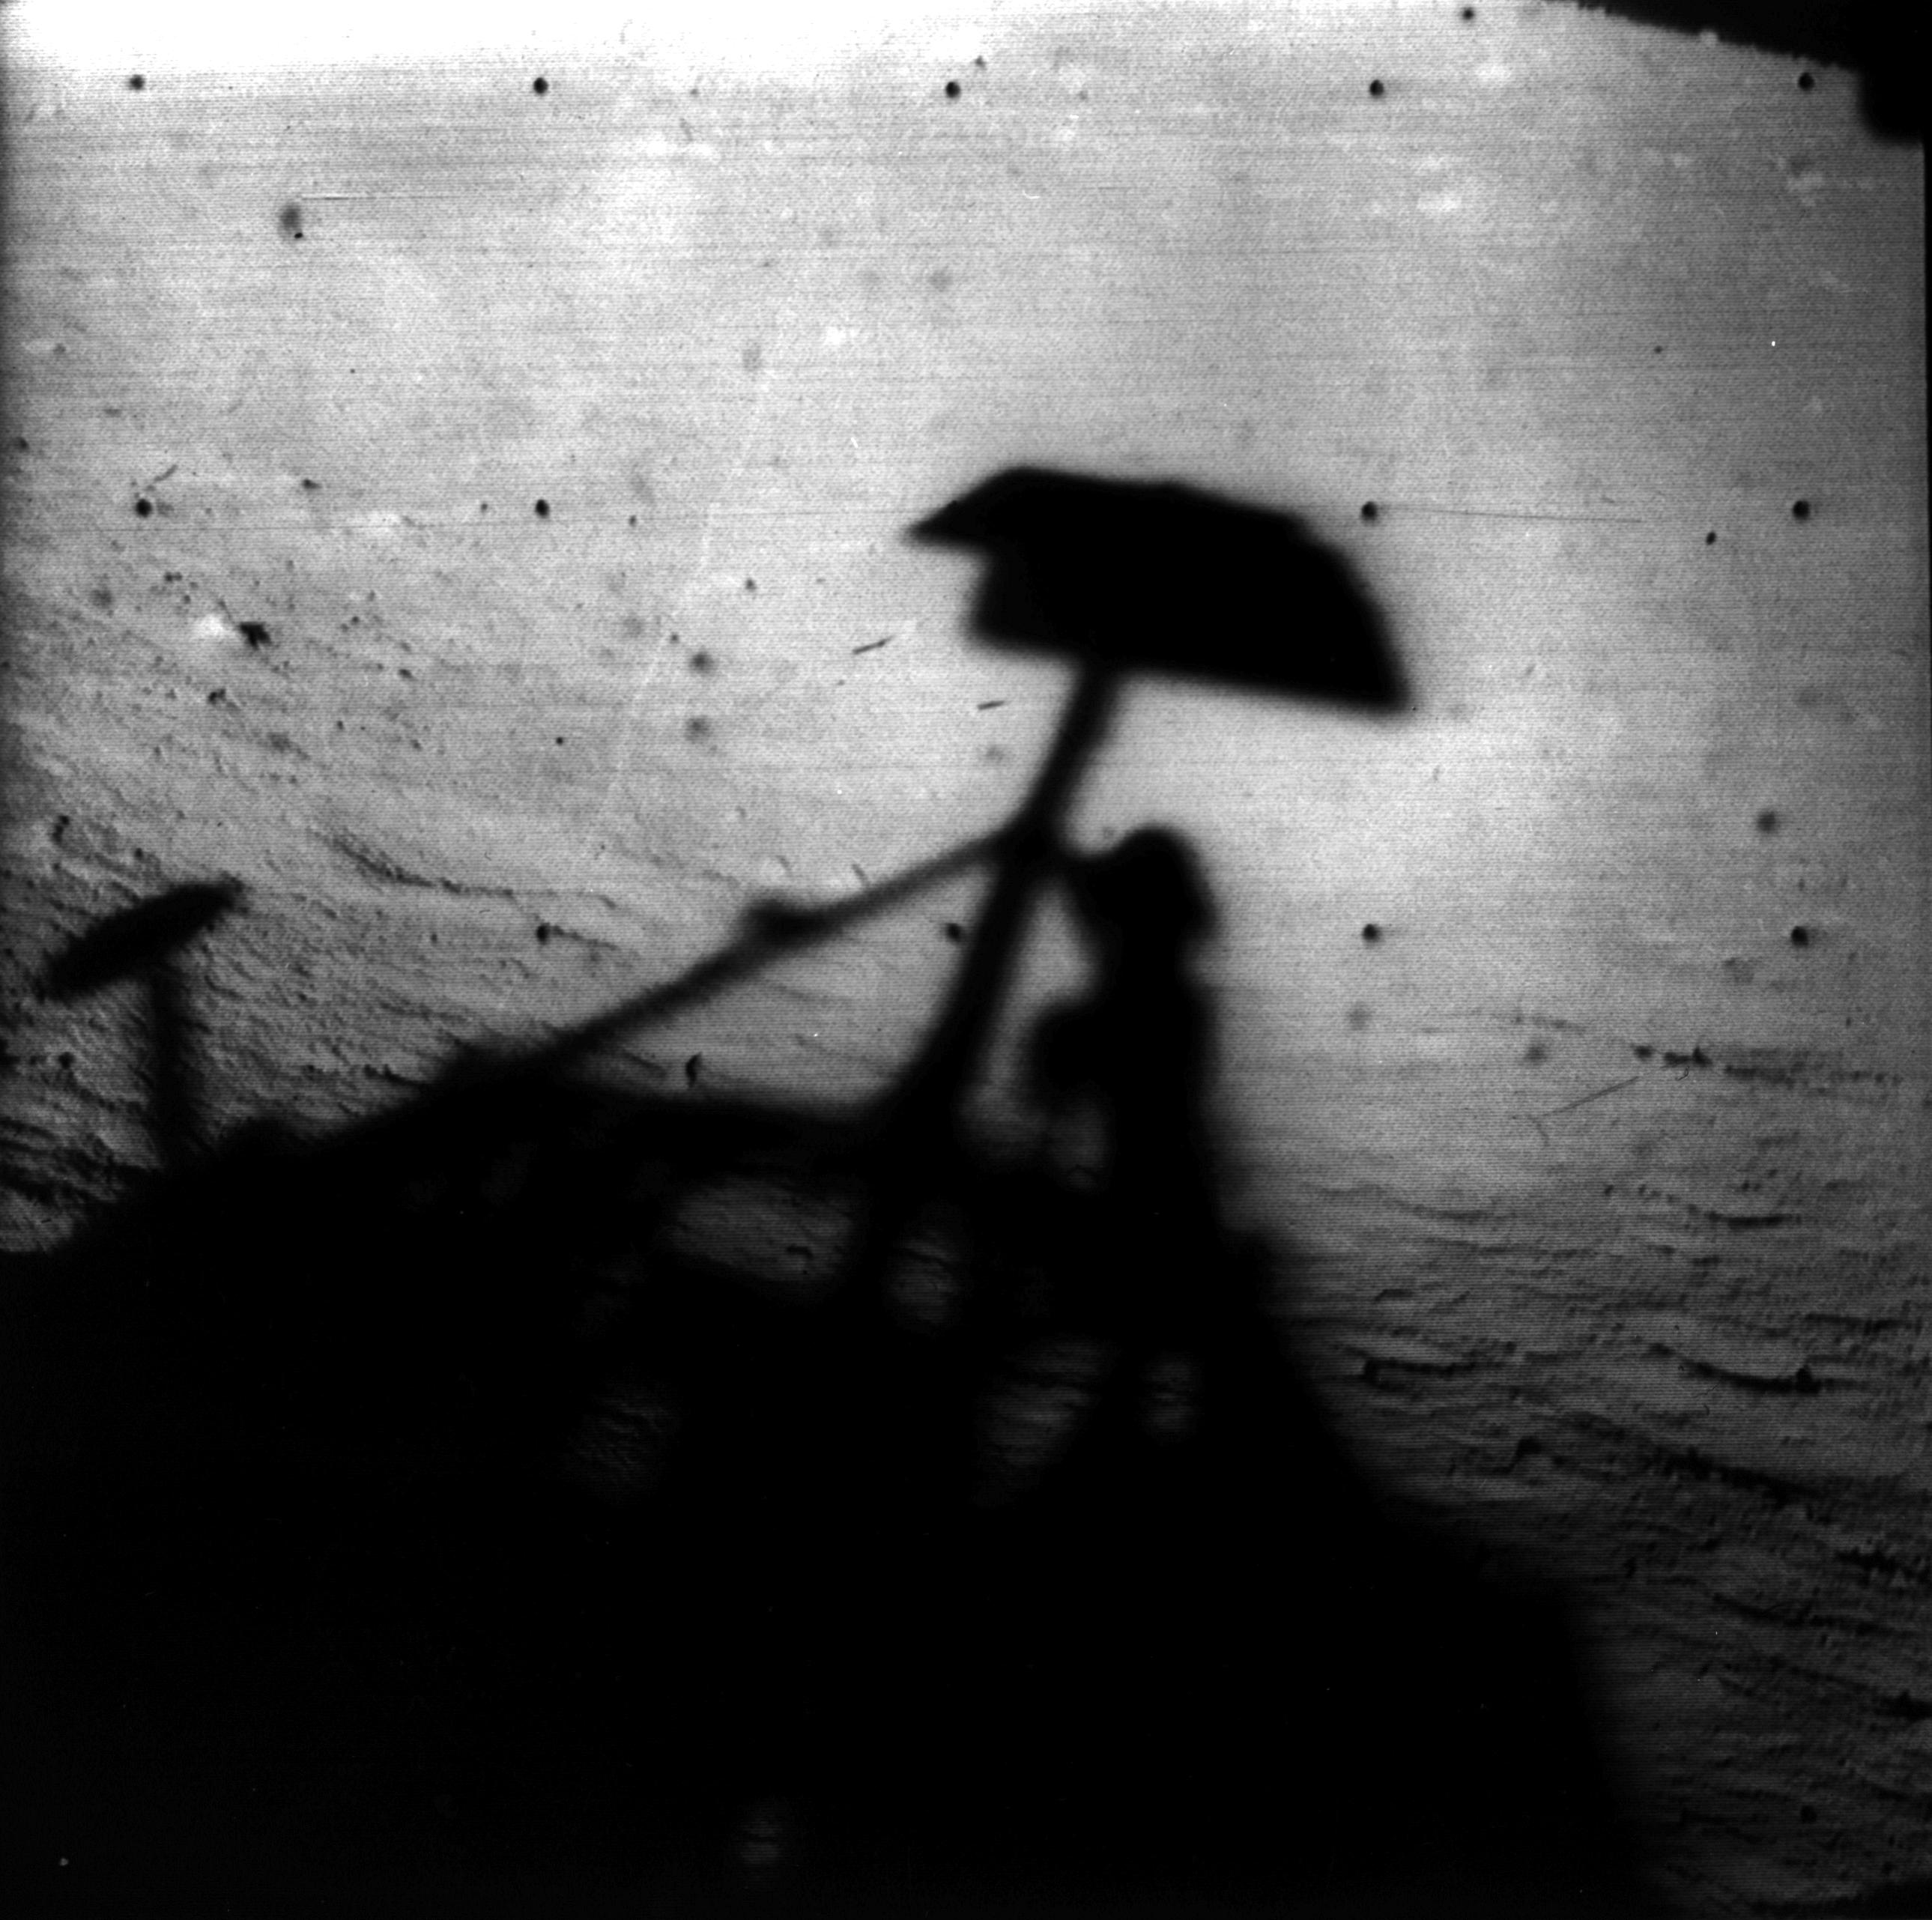 Black and white image of shadow of spacecraft on the surface of the Moon.